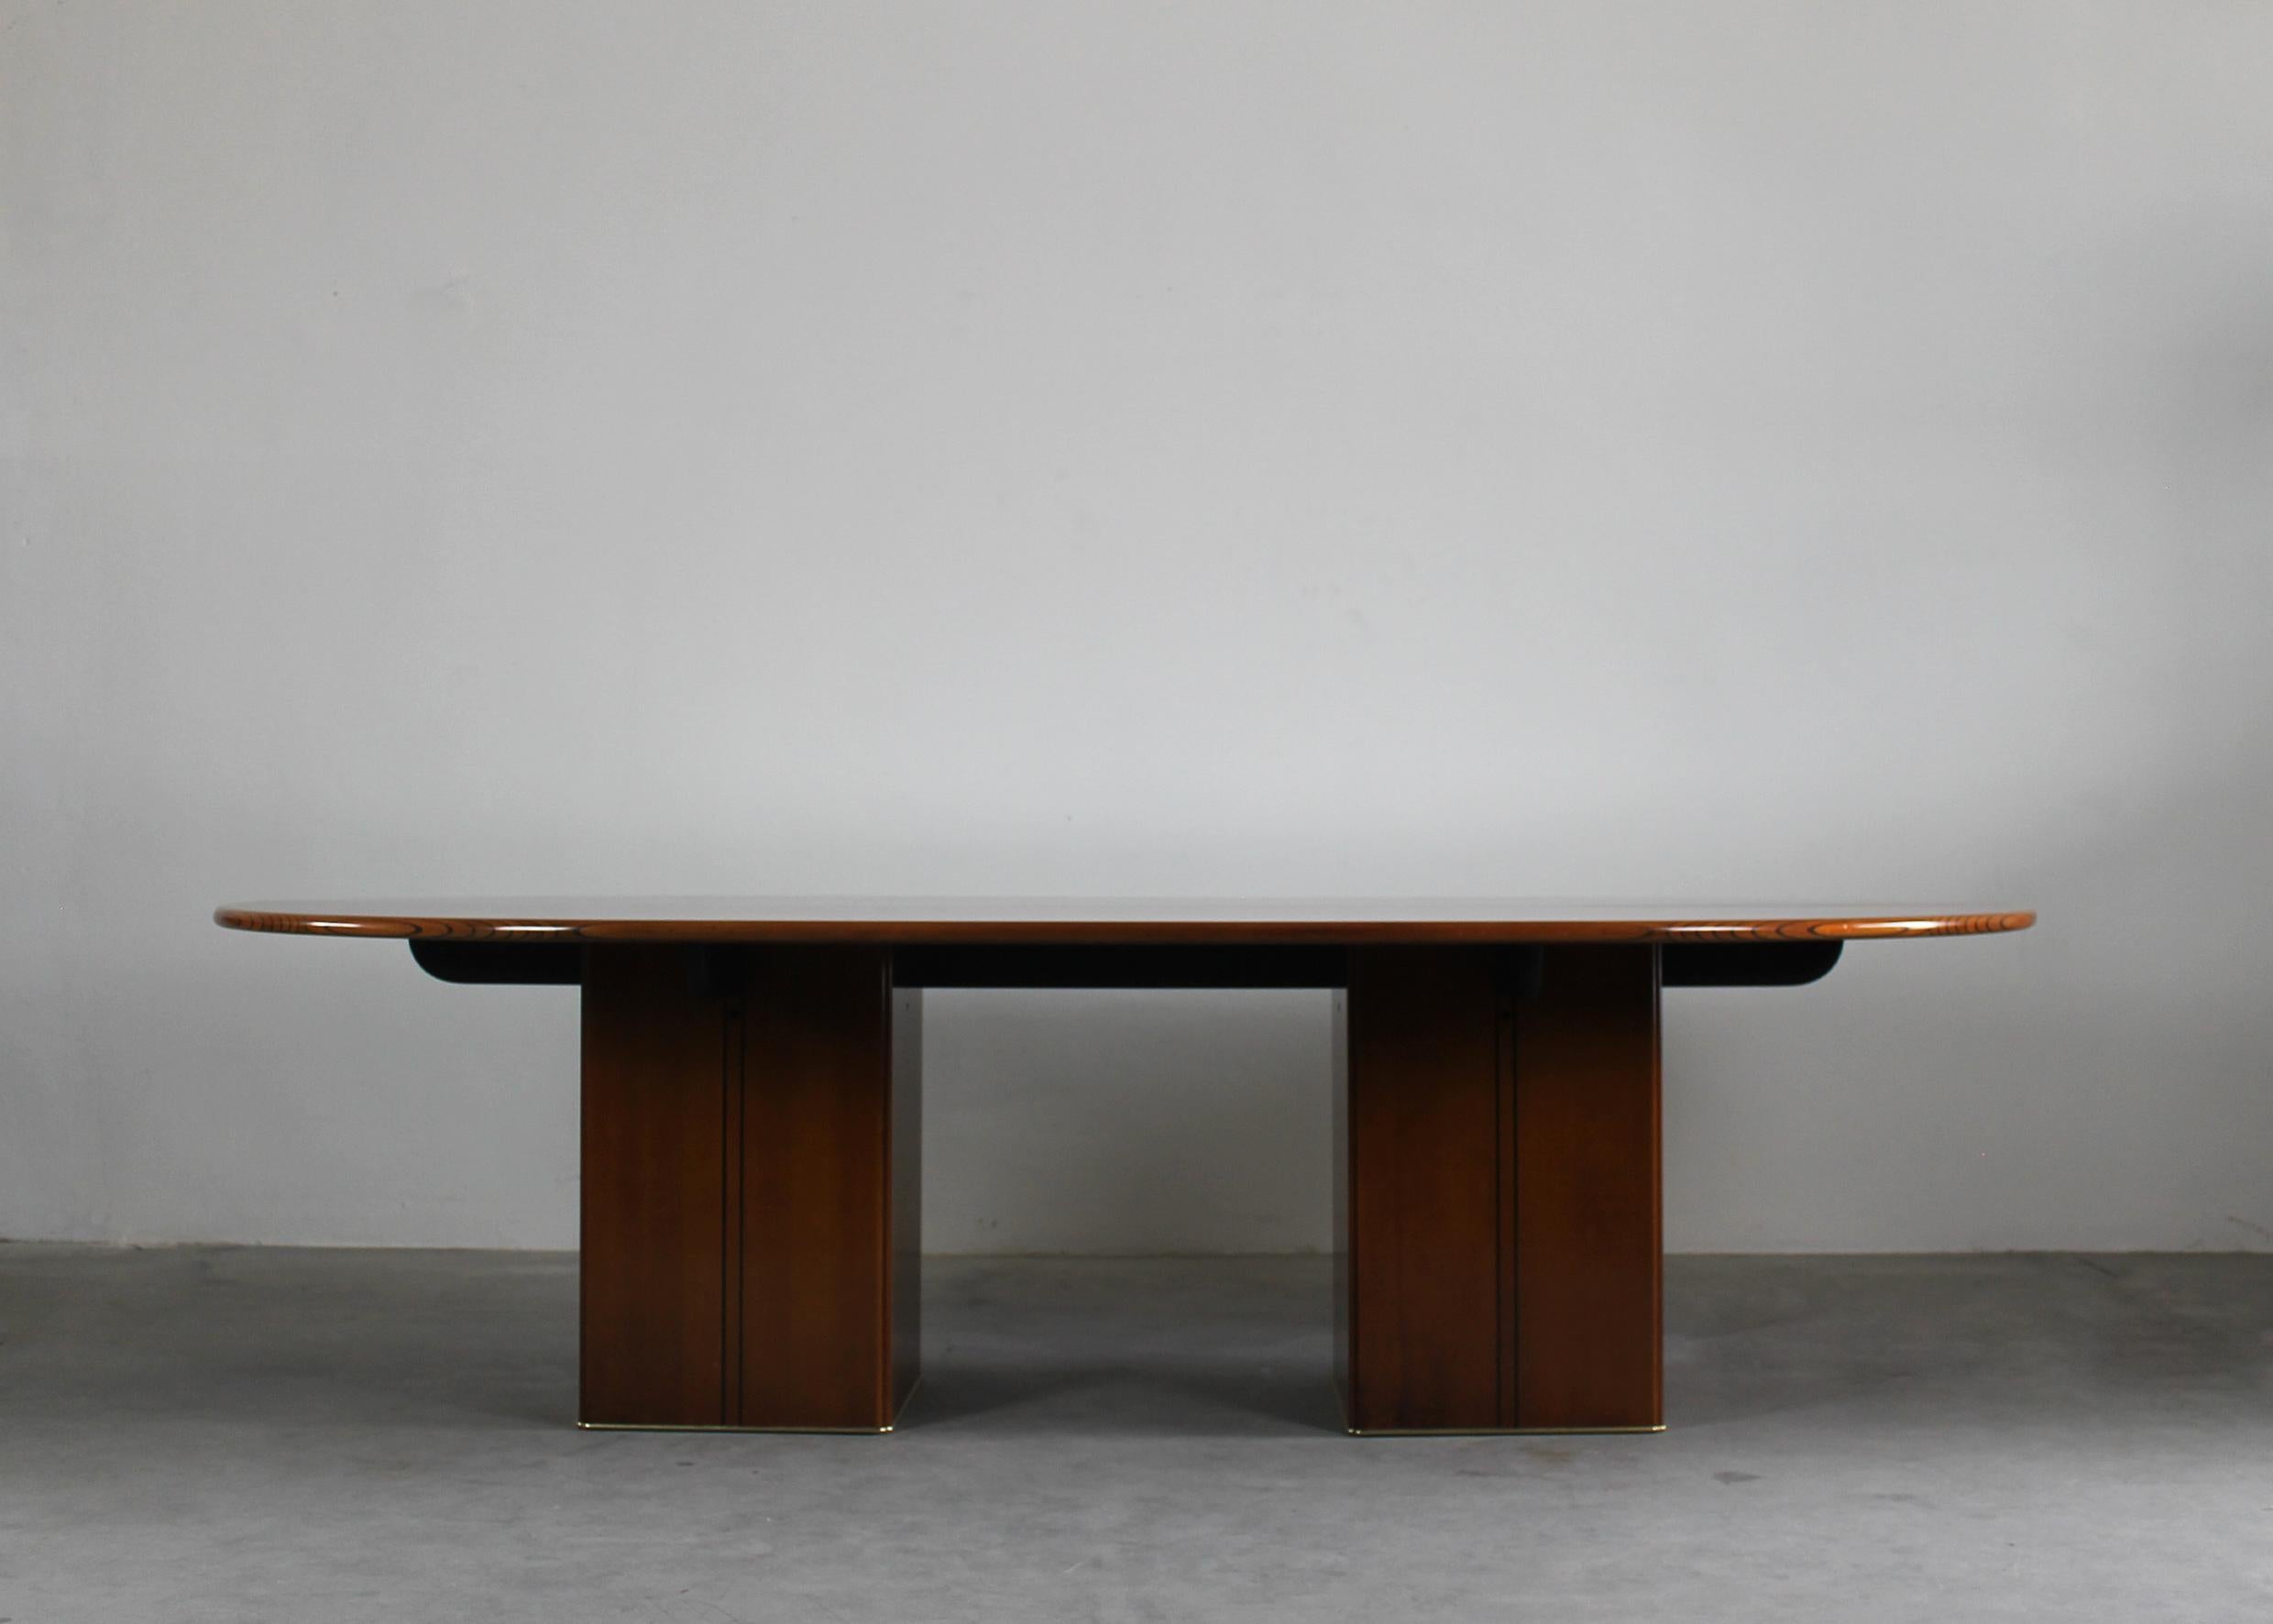 Large oval-shaped table in walnut wood and walnut burl with brass details, the tabletop is made in two pieces which are divided over the length, and it is supported by two square column legs. 

Designed by Tobia and Afra Scarpa for Maxalto